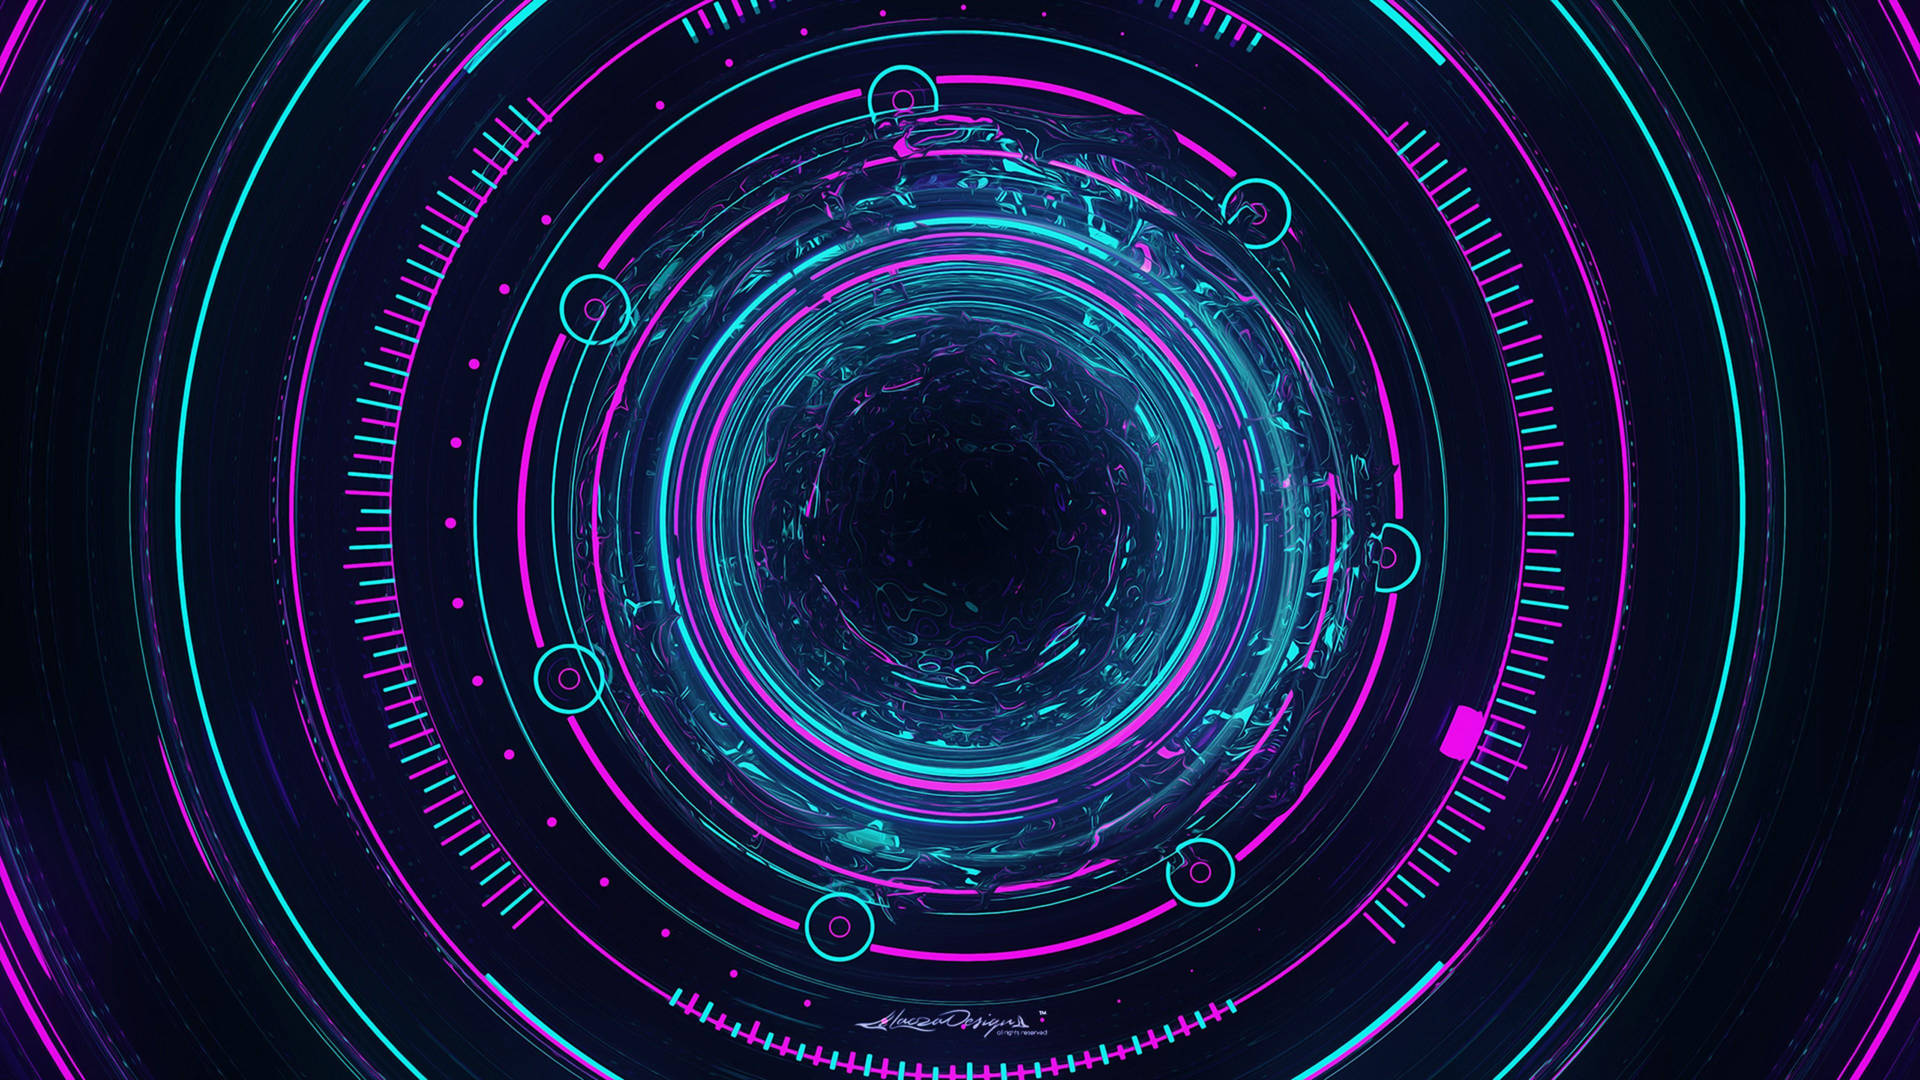 High tech interstellar abstract art with glowing blue and purple circles.